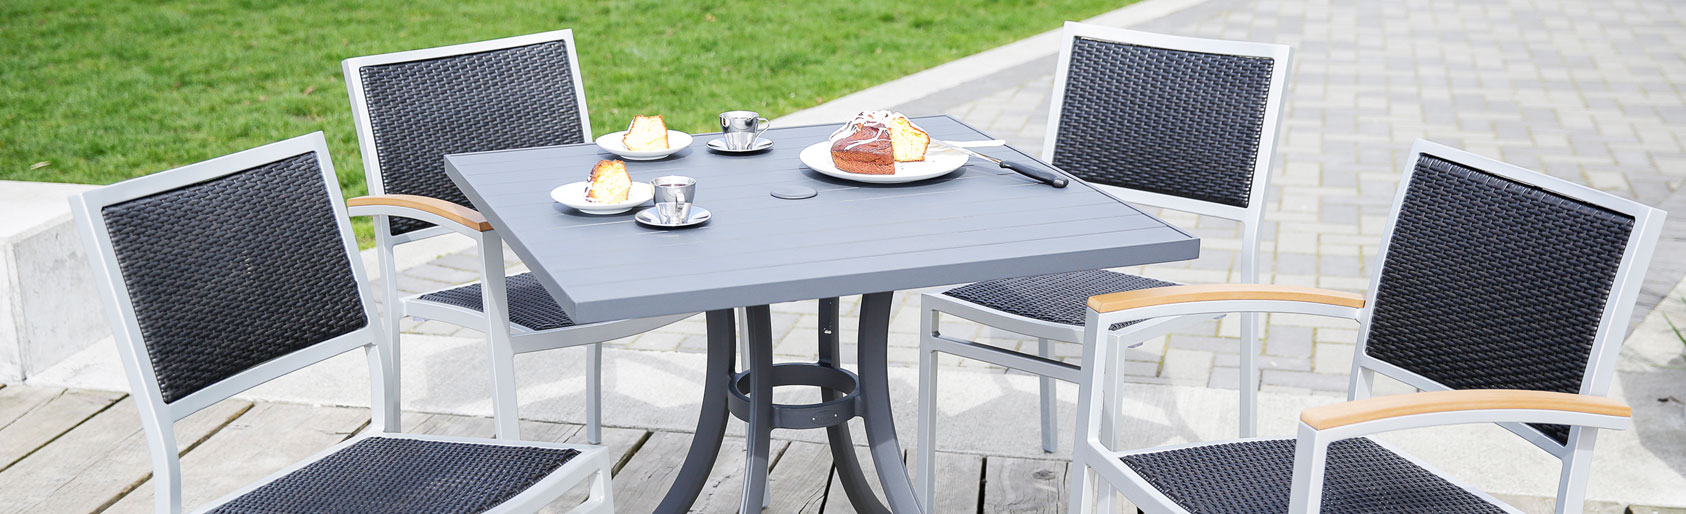 tables-outdoor